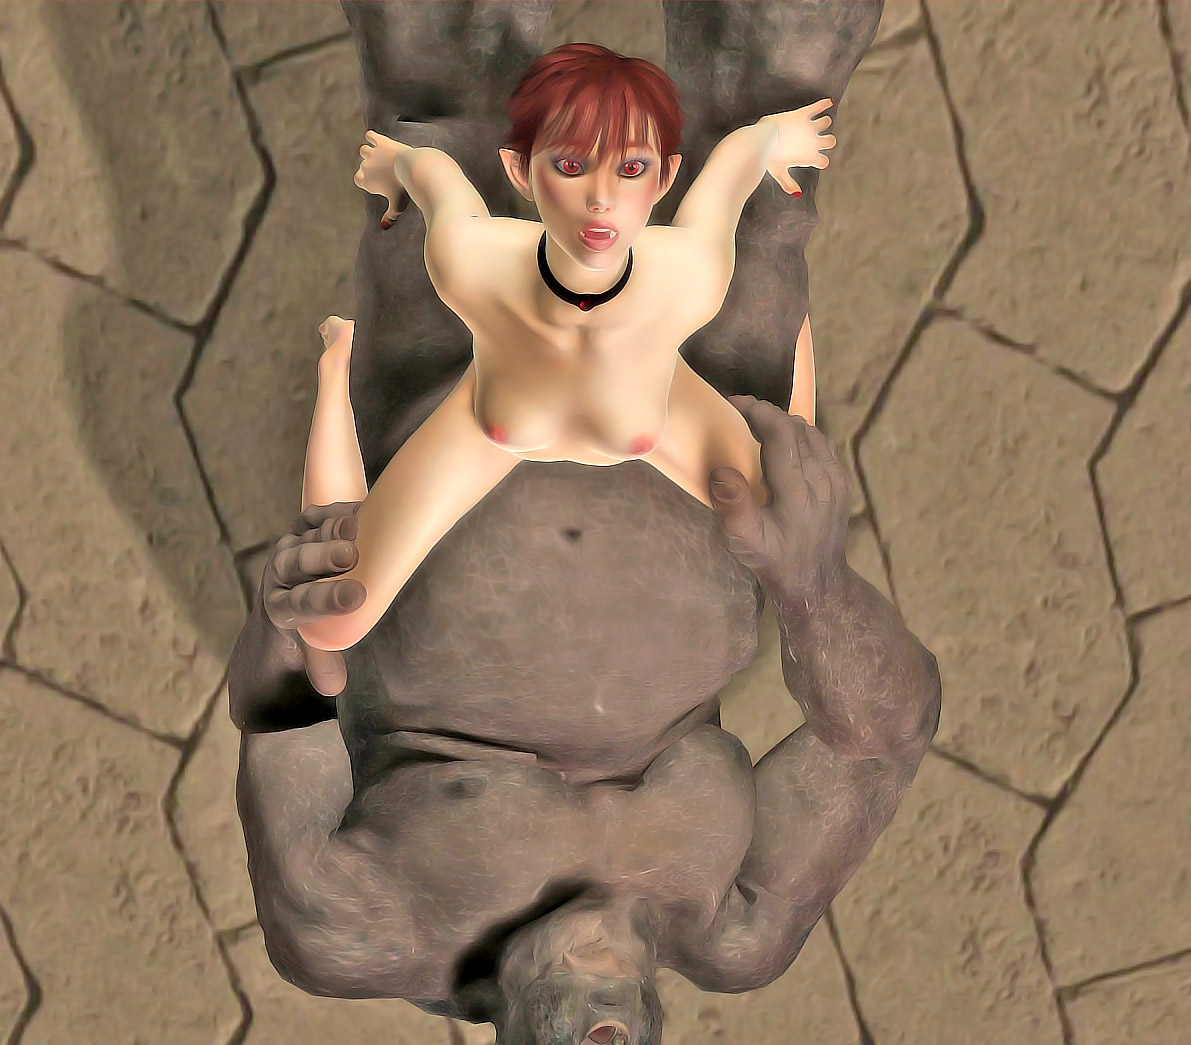 Petite Huge Big Monster - Petite girl gets her pussy destroyed by troll's giant cock |  3dwerewolfporn.com